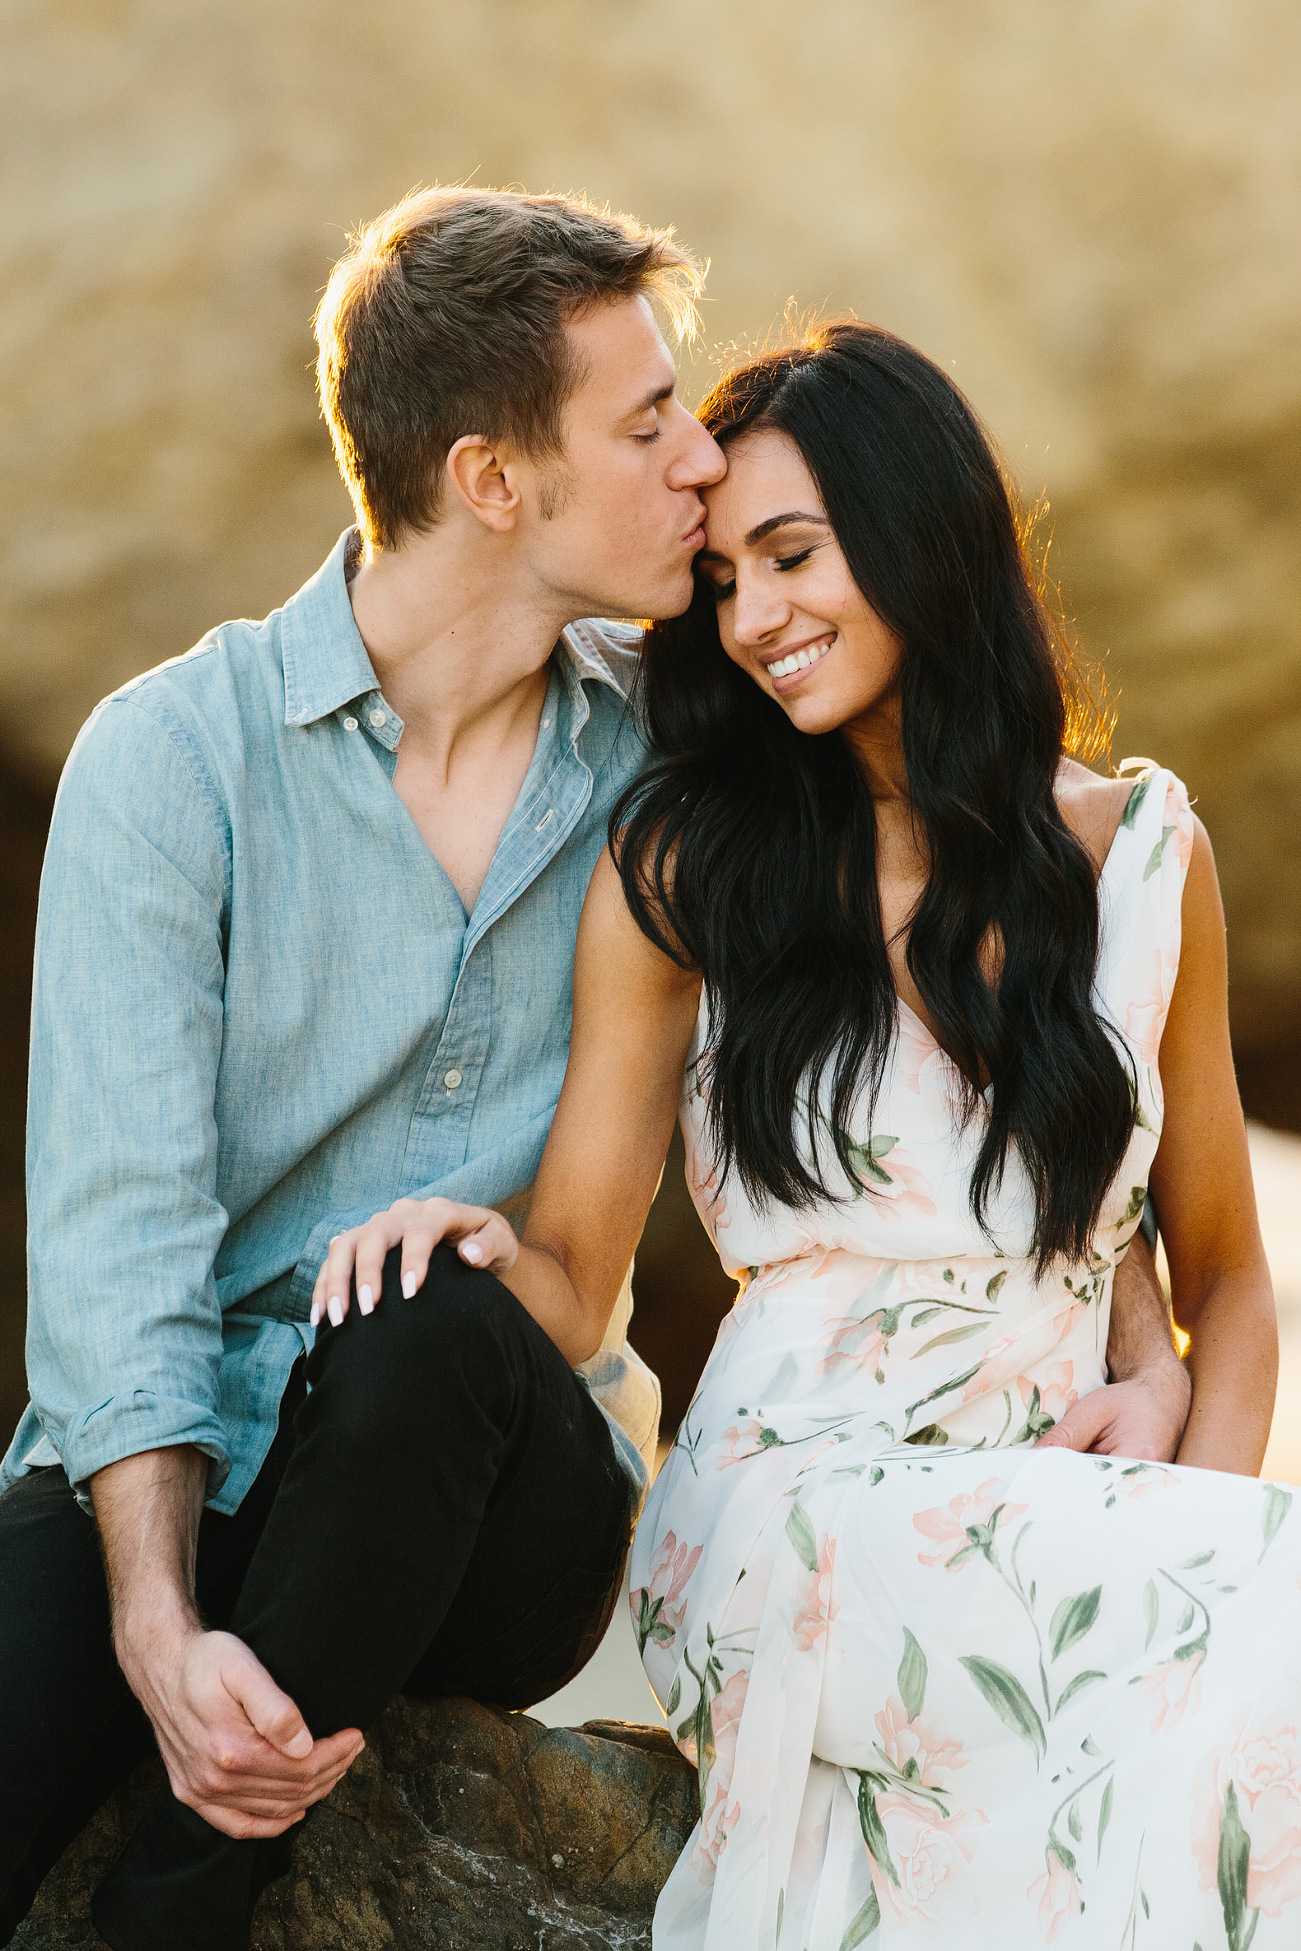 Fiance smiling as her grooms kisses her forehead at their engagement photo session